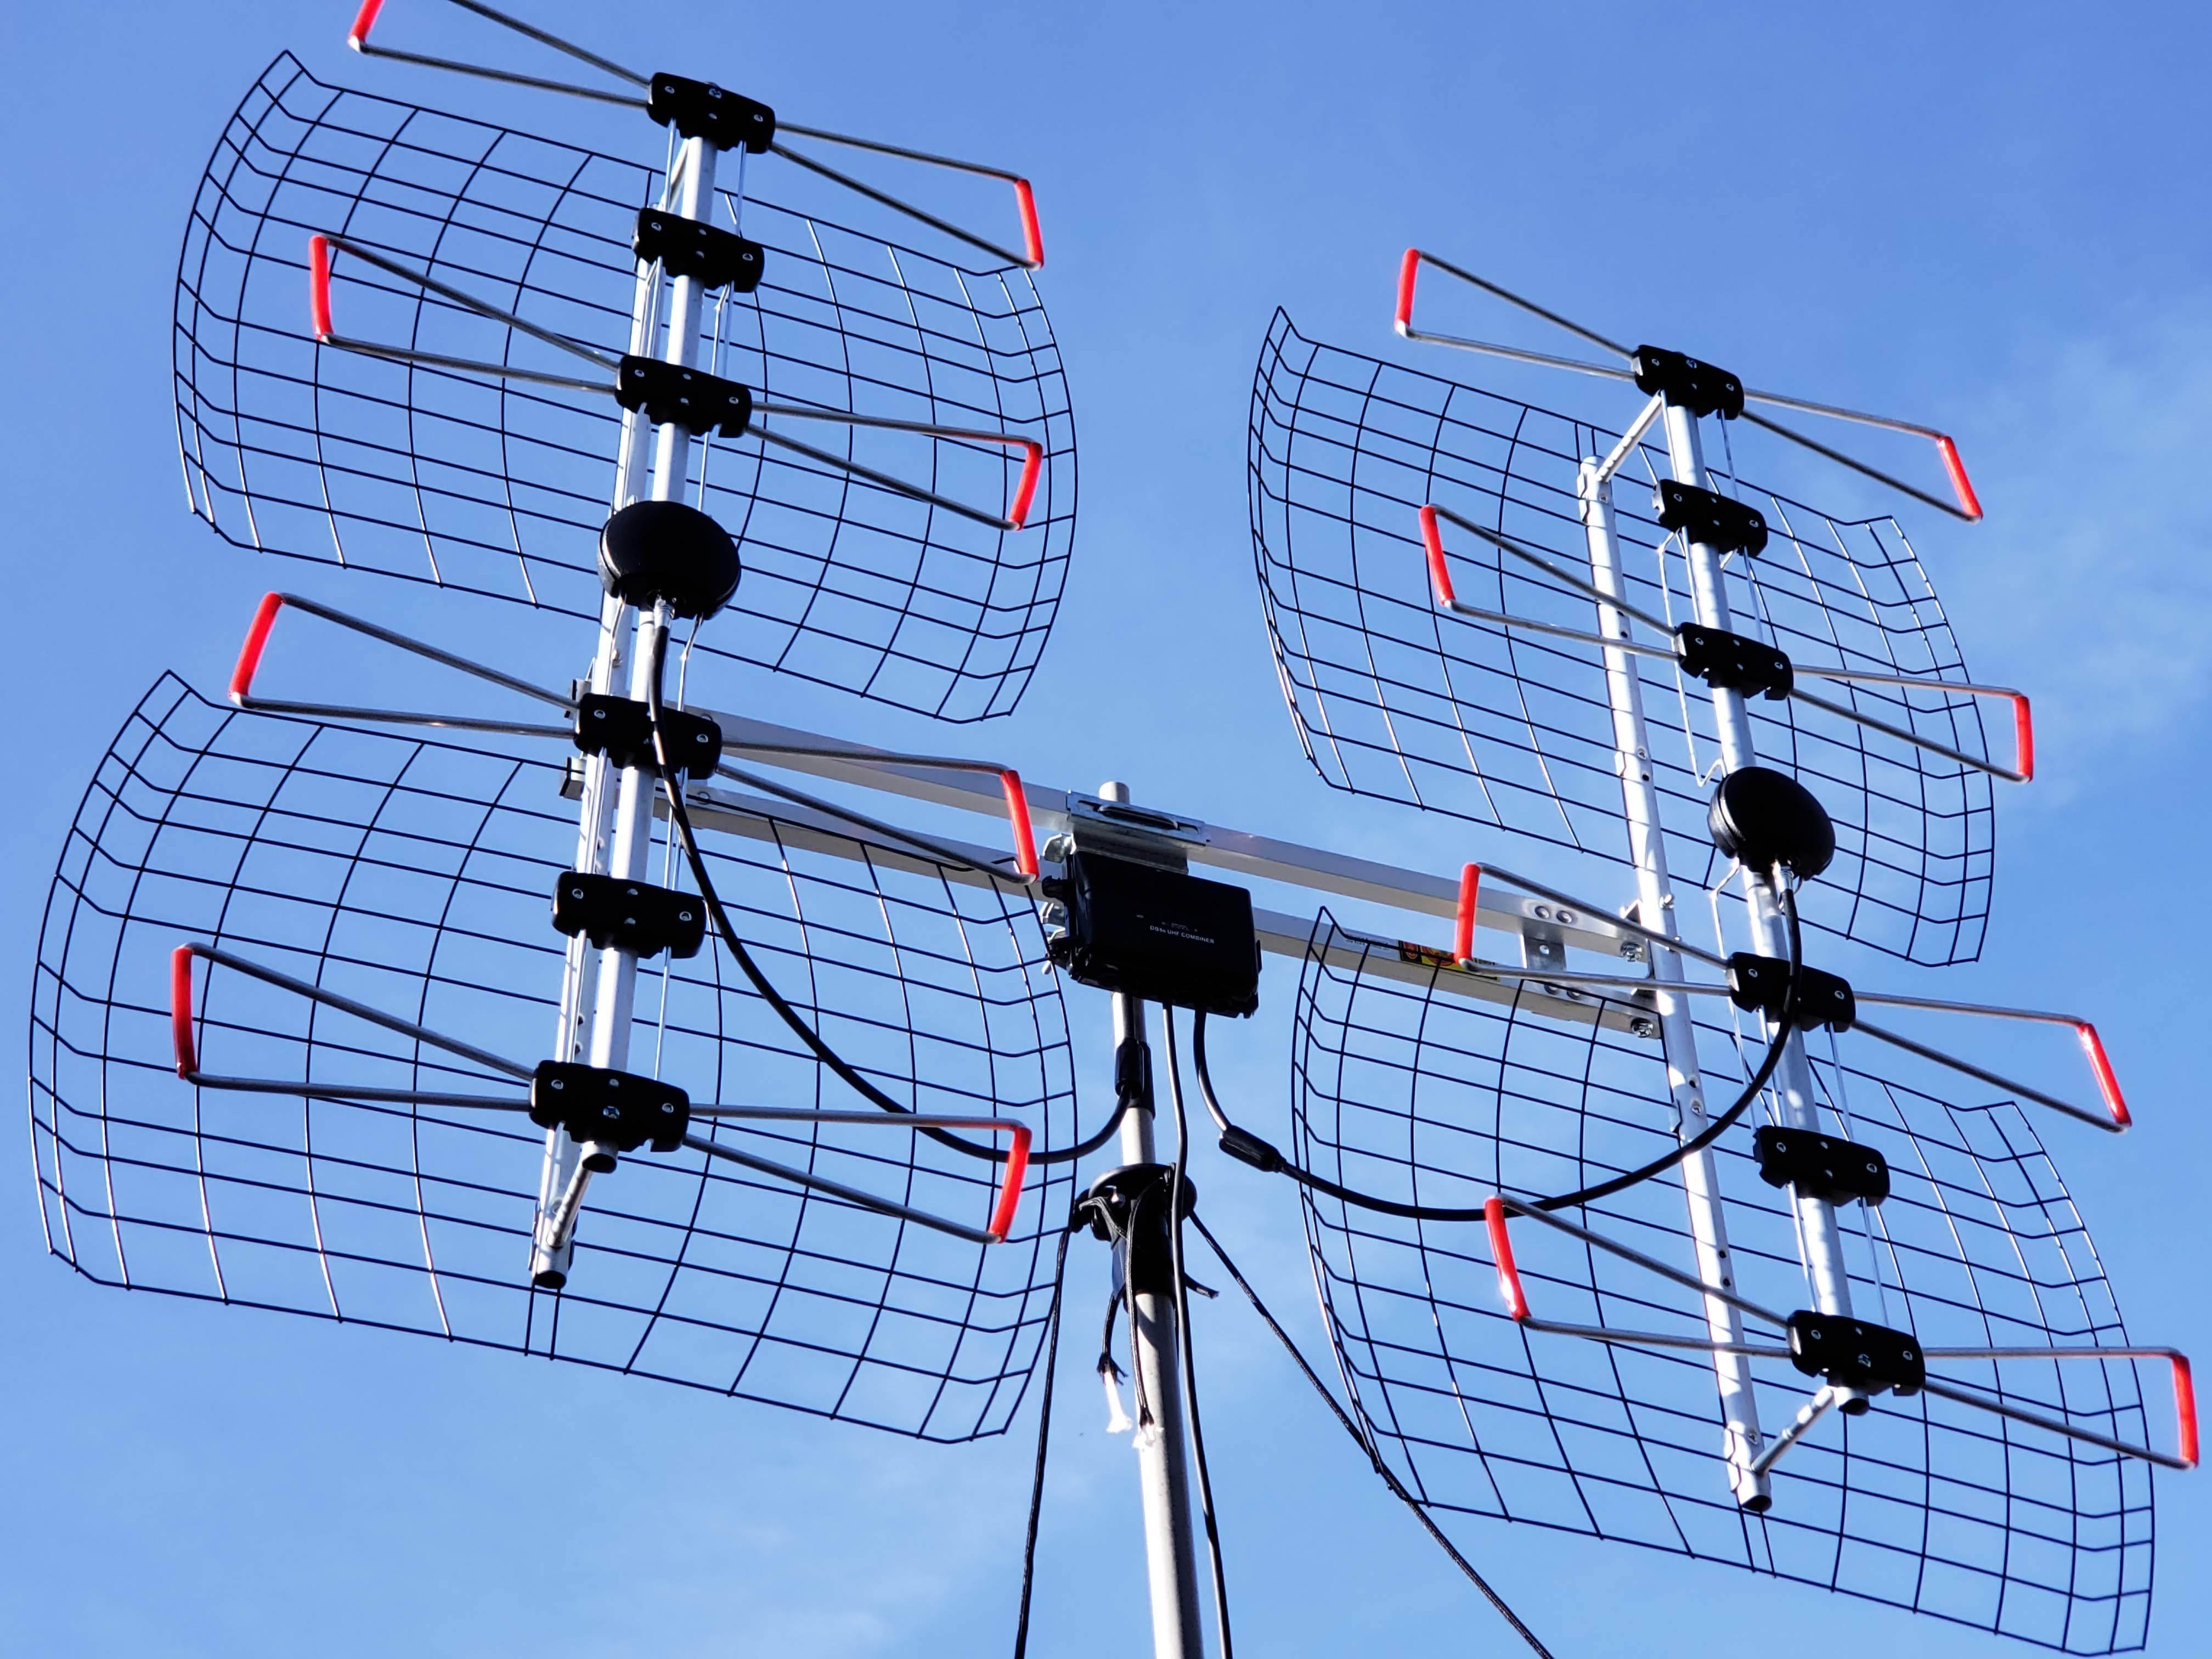 Antennas Direct DB8e review: This large roof-mount TV antenna is great at finding weak signals ...